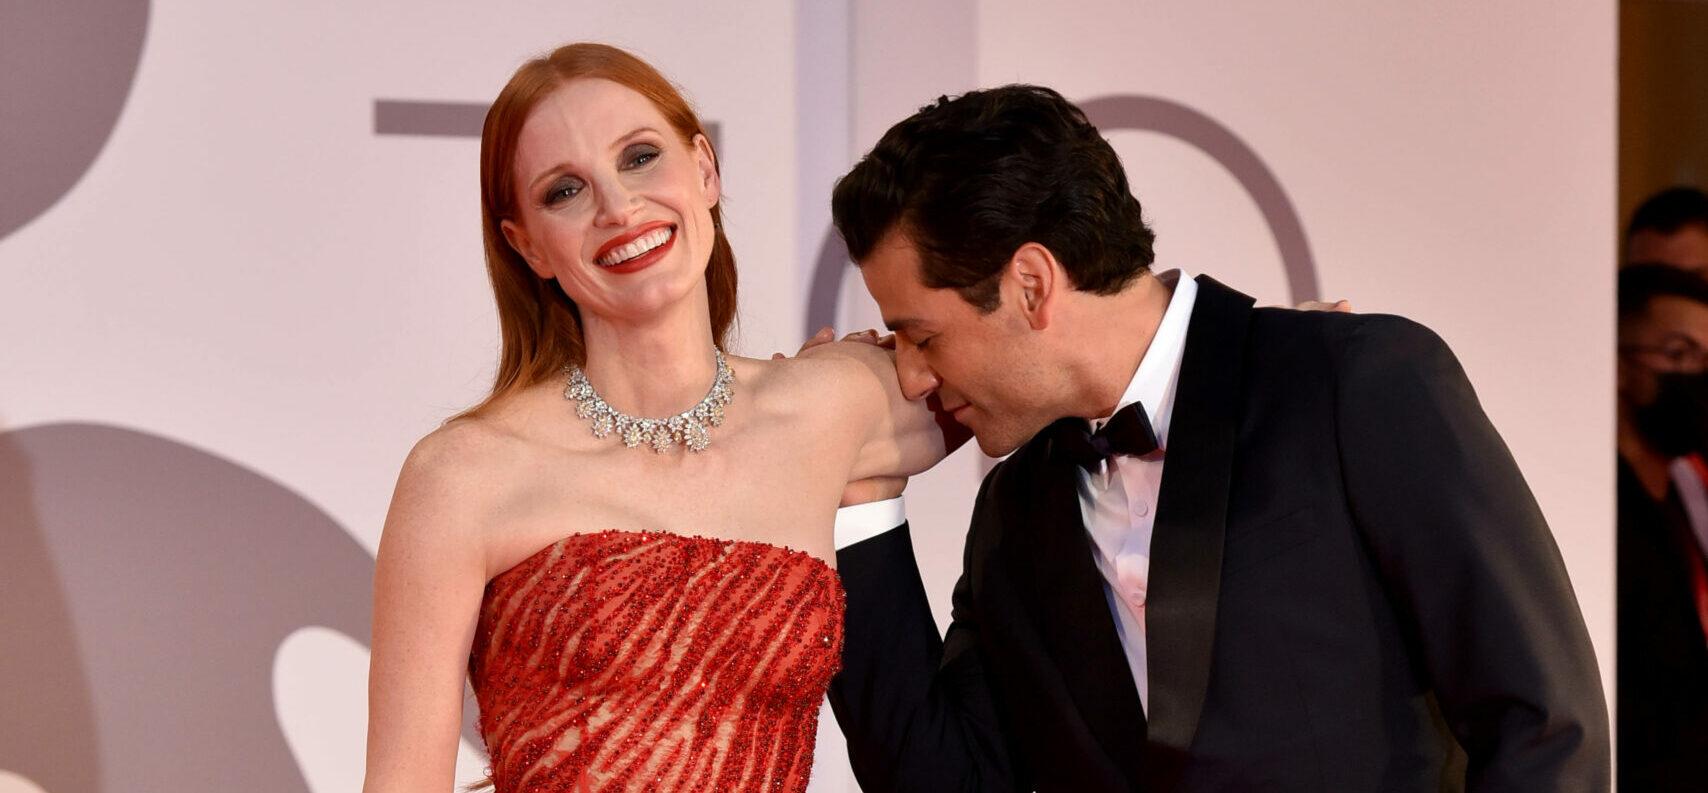 Jessica Chastain RESPONDS To Viral Red Carpet Moment With Oscar Isaac